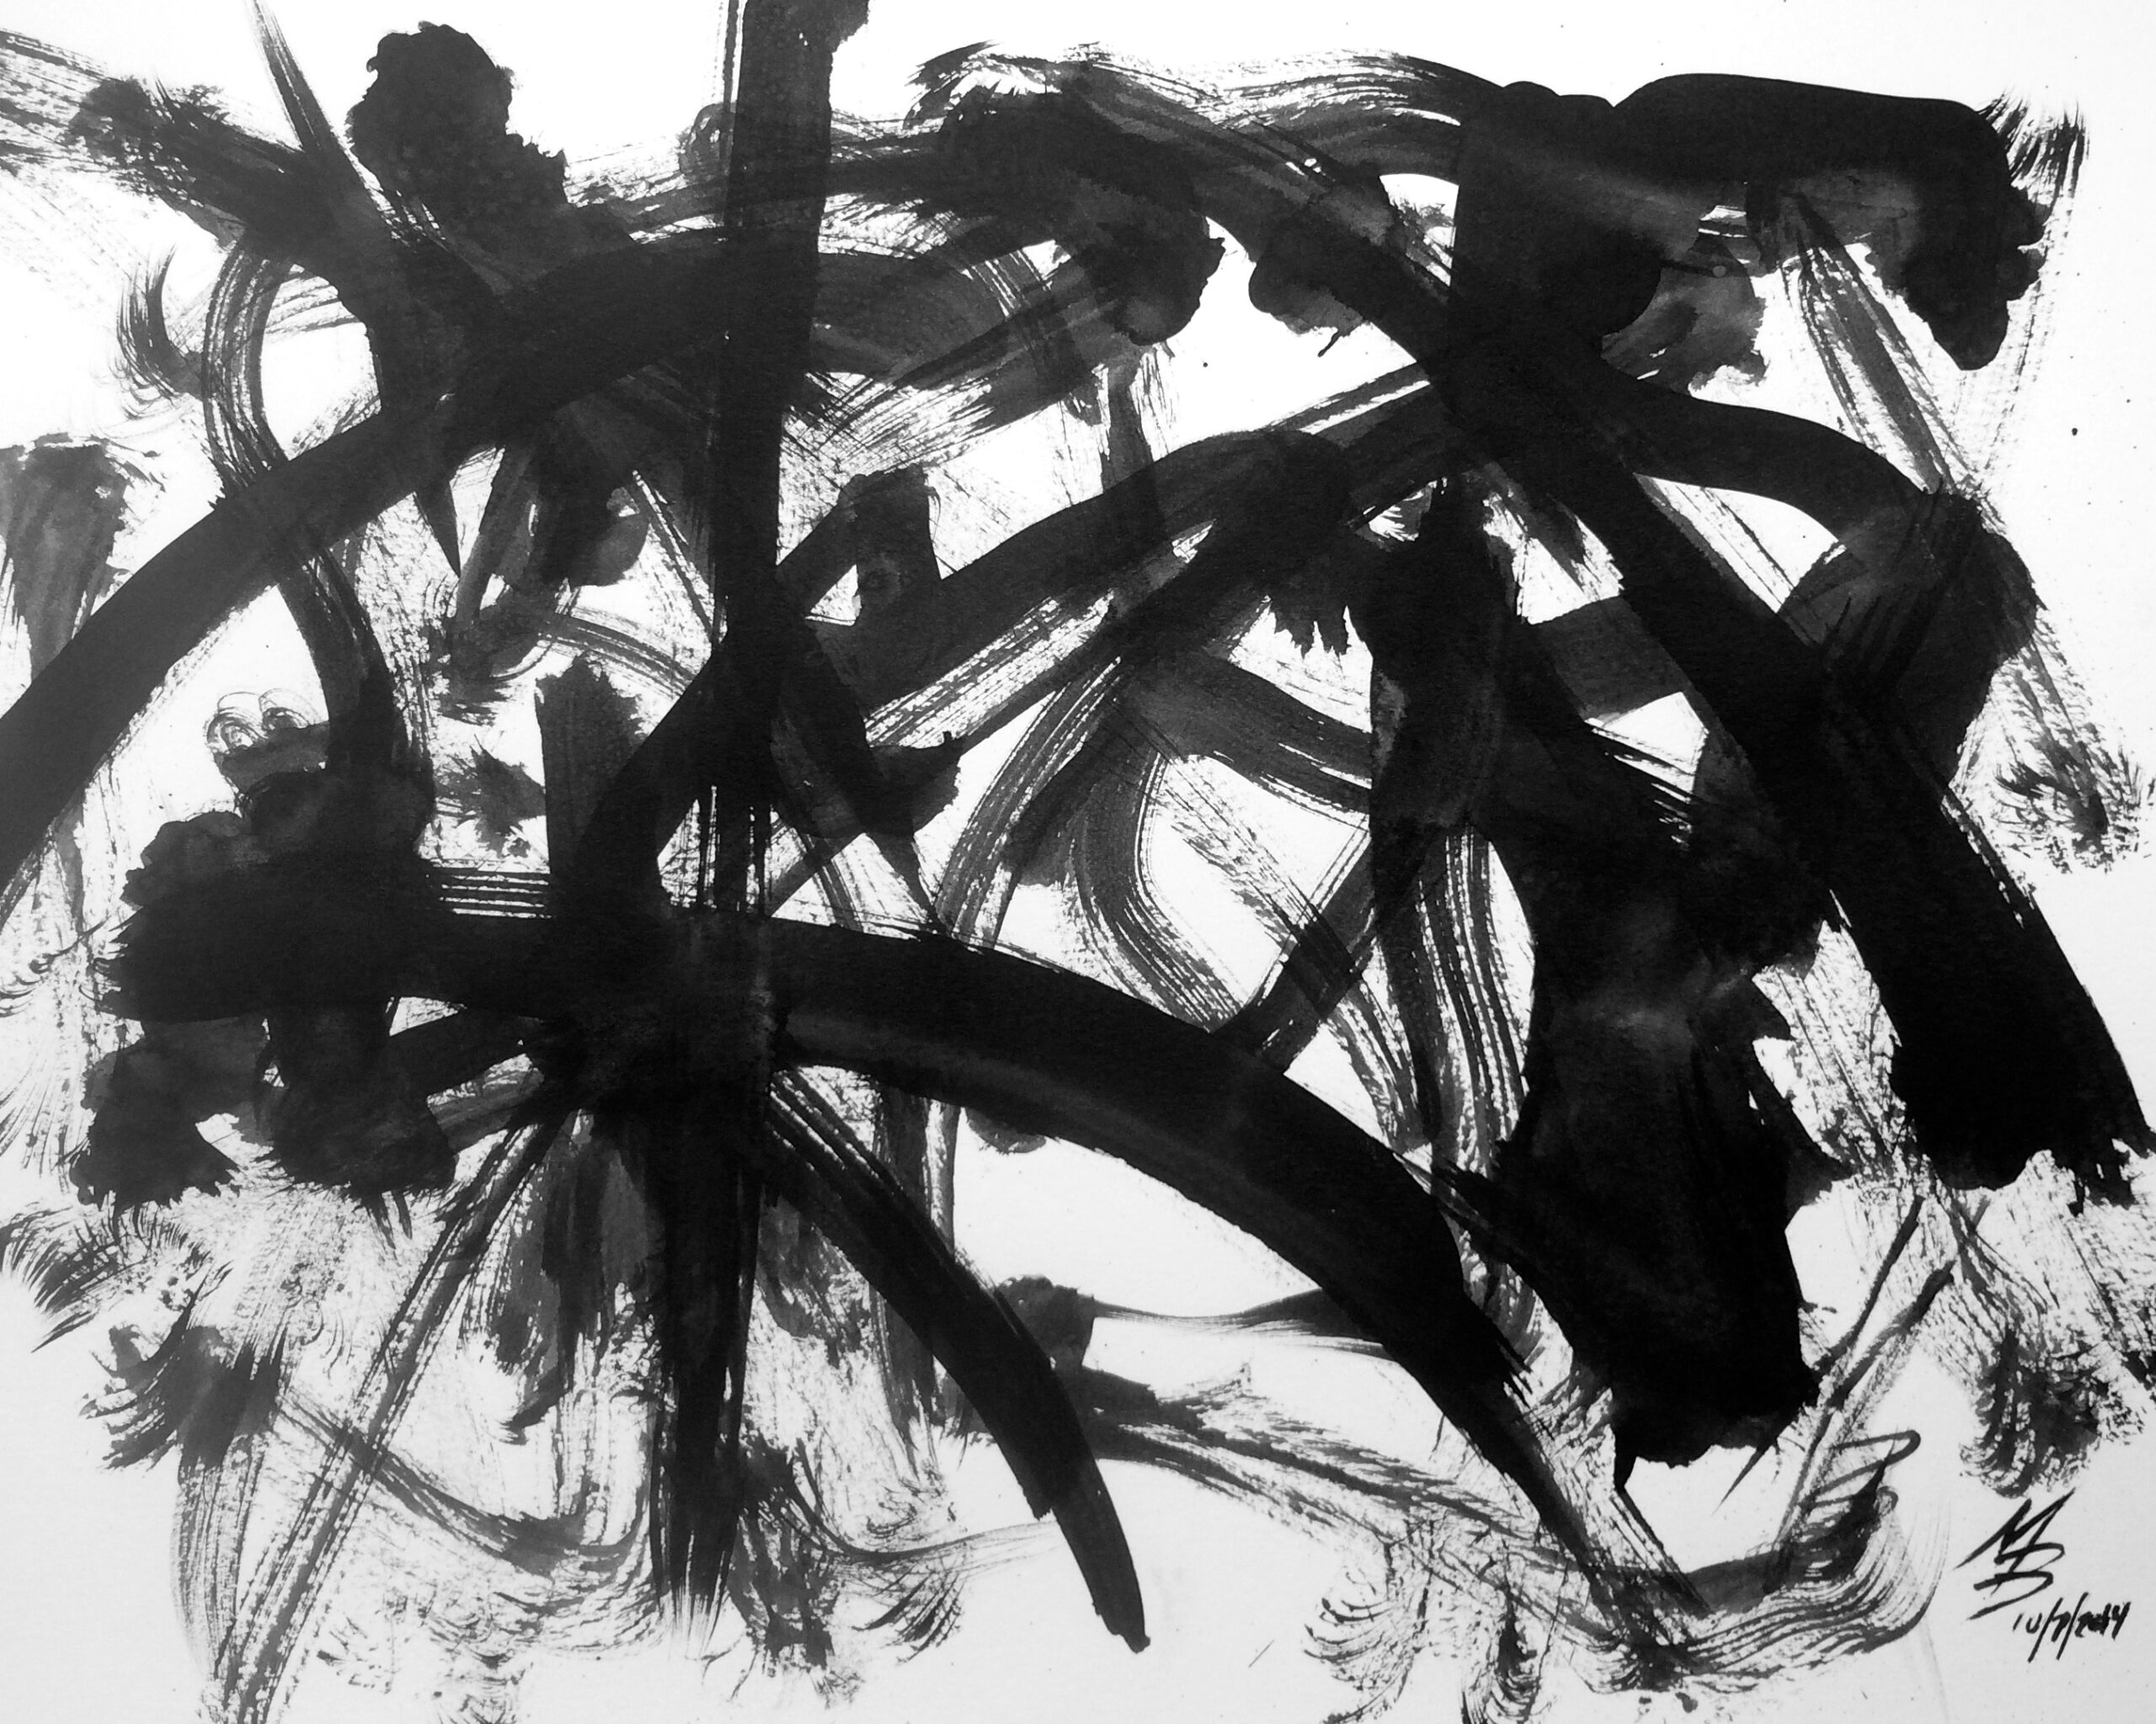 Abstract Ink by Mark Bray Oct 7 2014 Drawing for InkTober 1